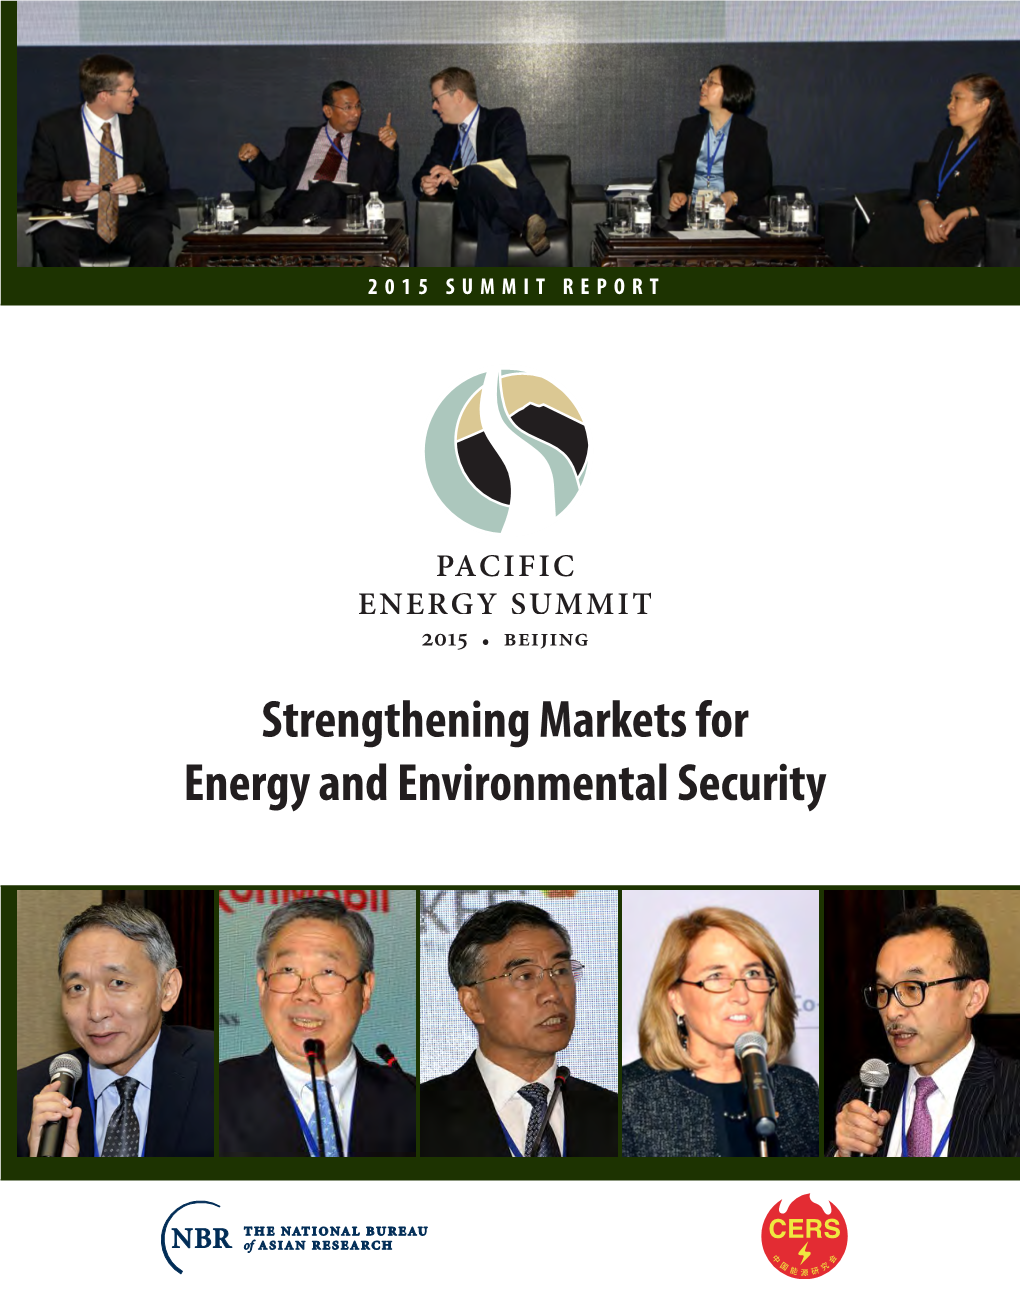 Strengthening Markets for Energy and Environmental Security